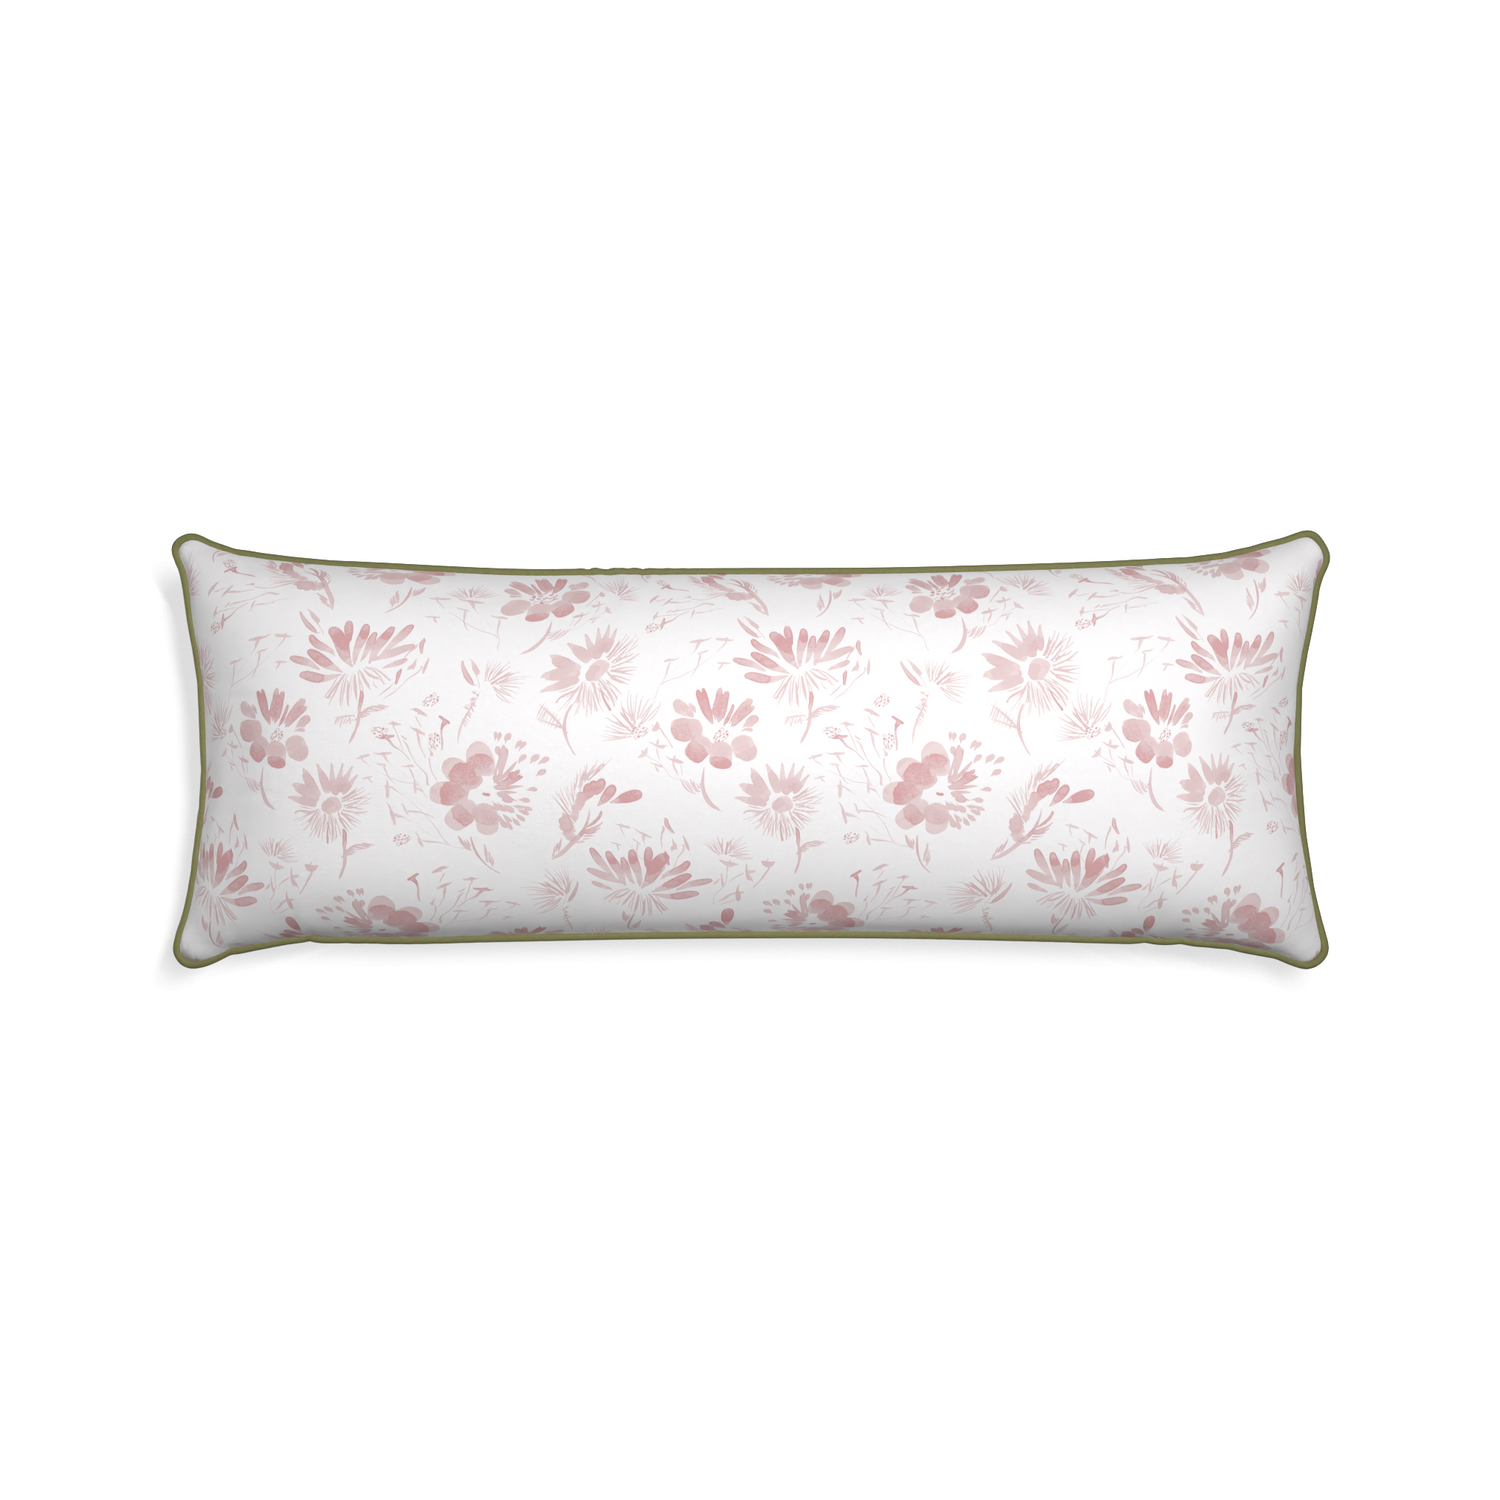 Xl-lumbar blake custom pink floralpillow with moss piping on white background